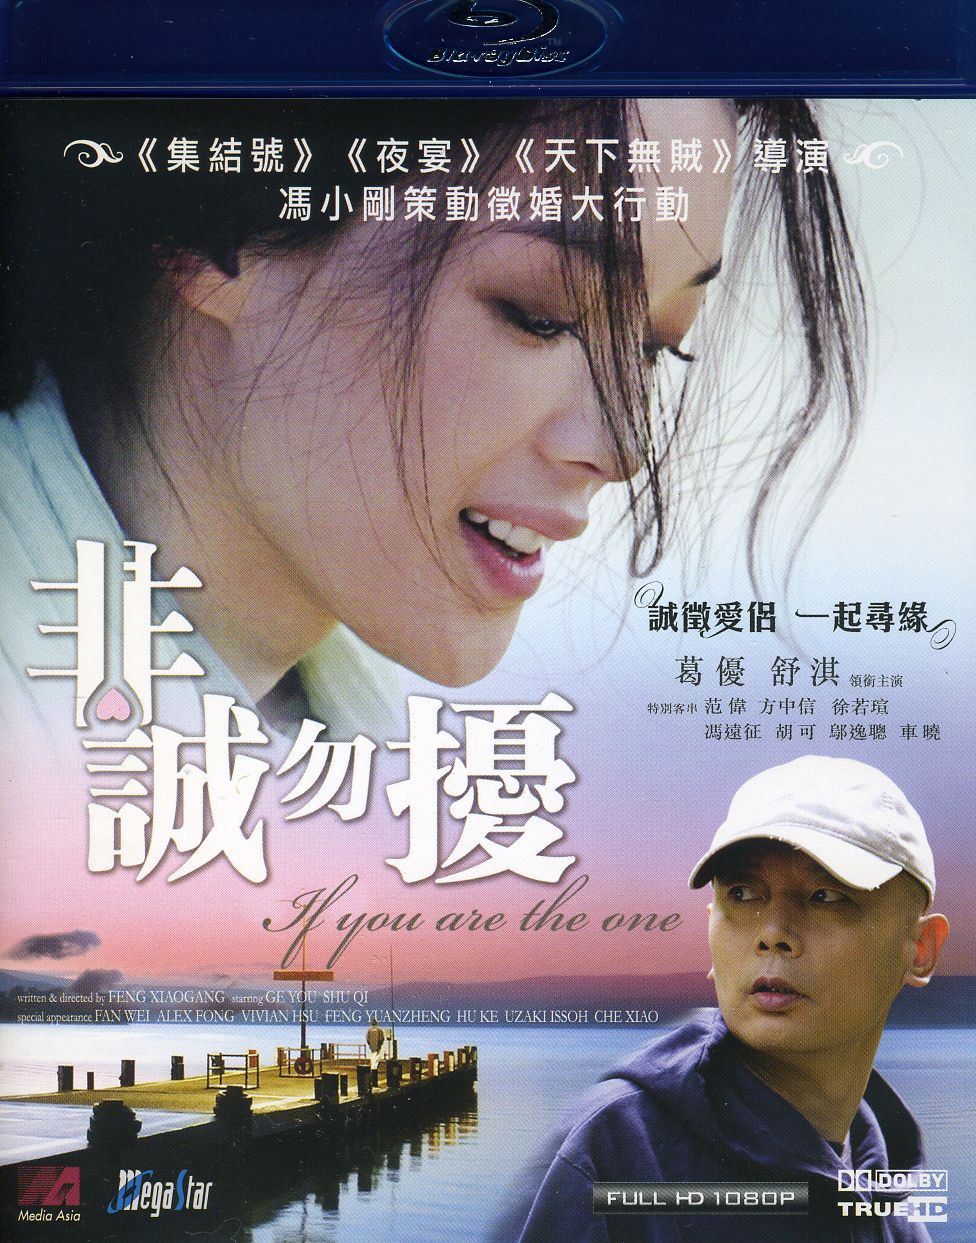 IF YOU ARE THE ONE ( FEI CHENG WU RAO ) / (SUB)